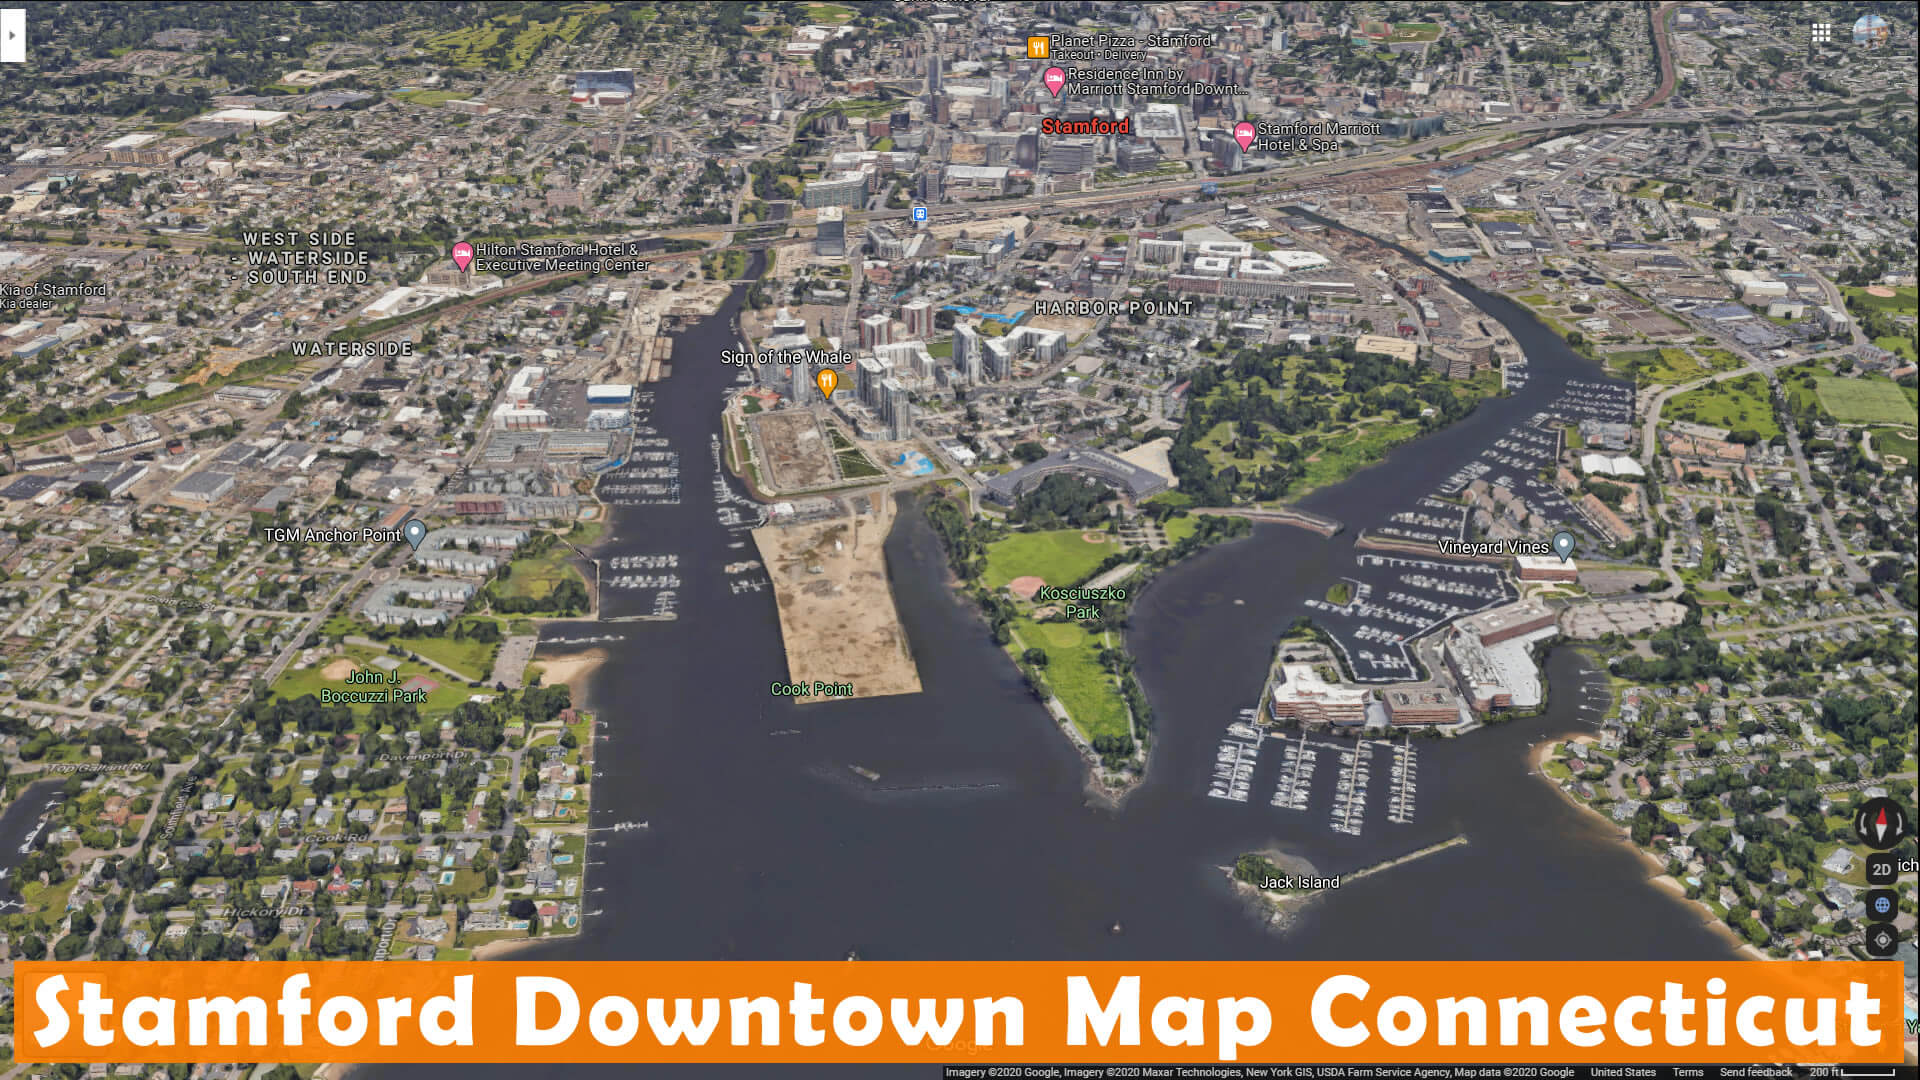 Stamford Downtown Map Connecticut